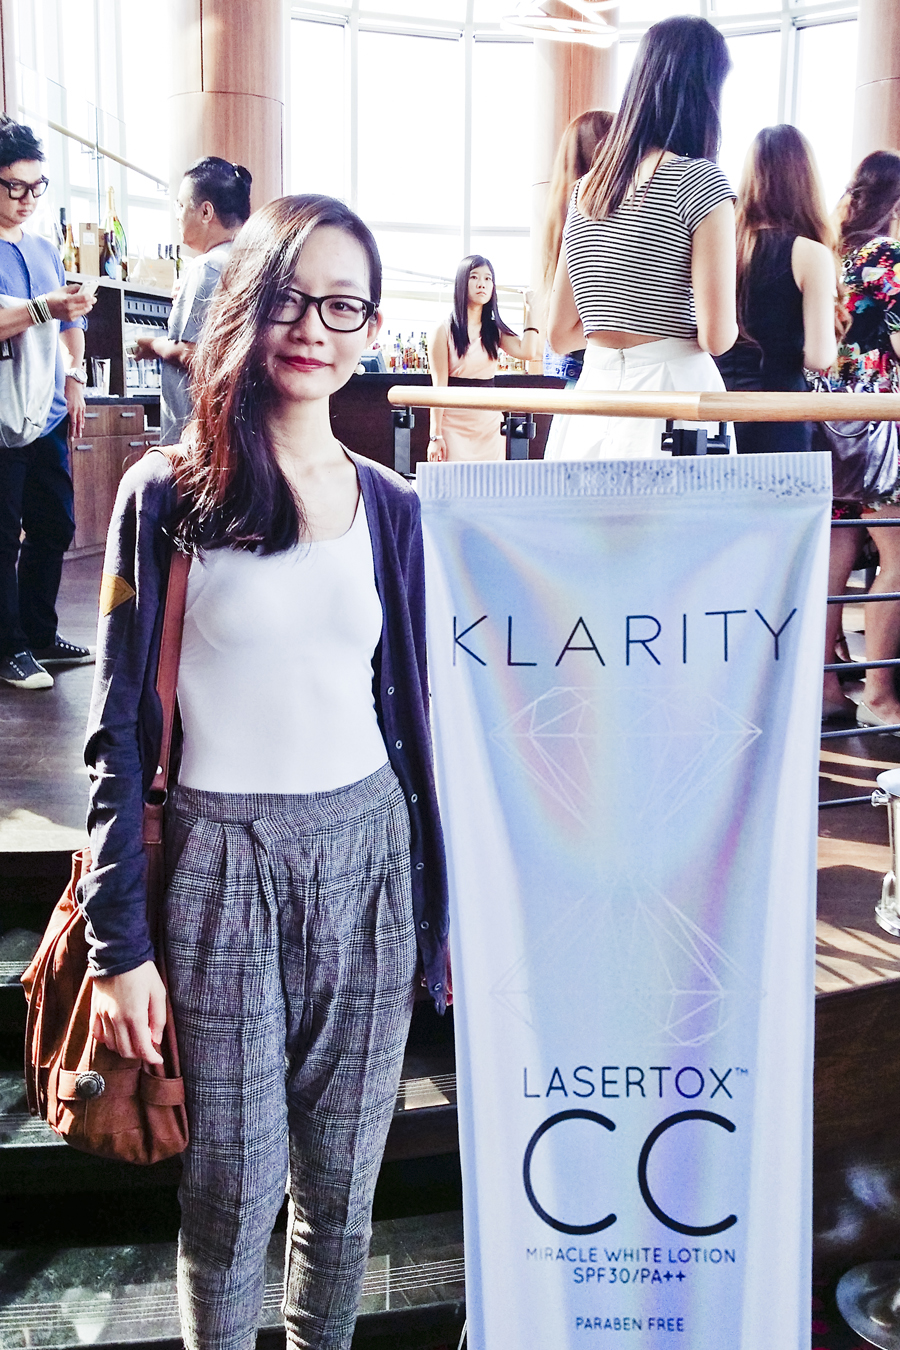 Ren posing with the Klarity CC cream cut-out at the Klarity Beauty Brunch event.